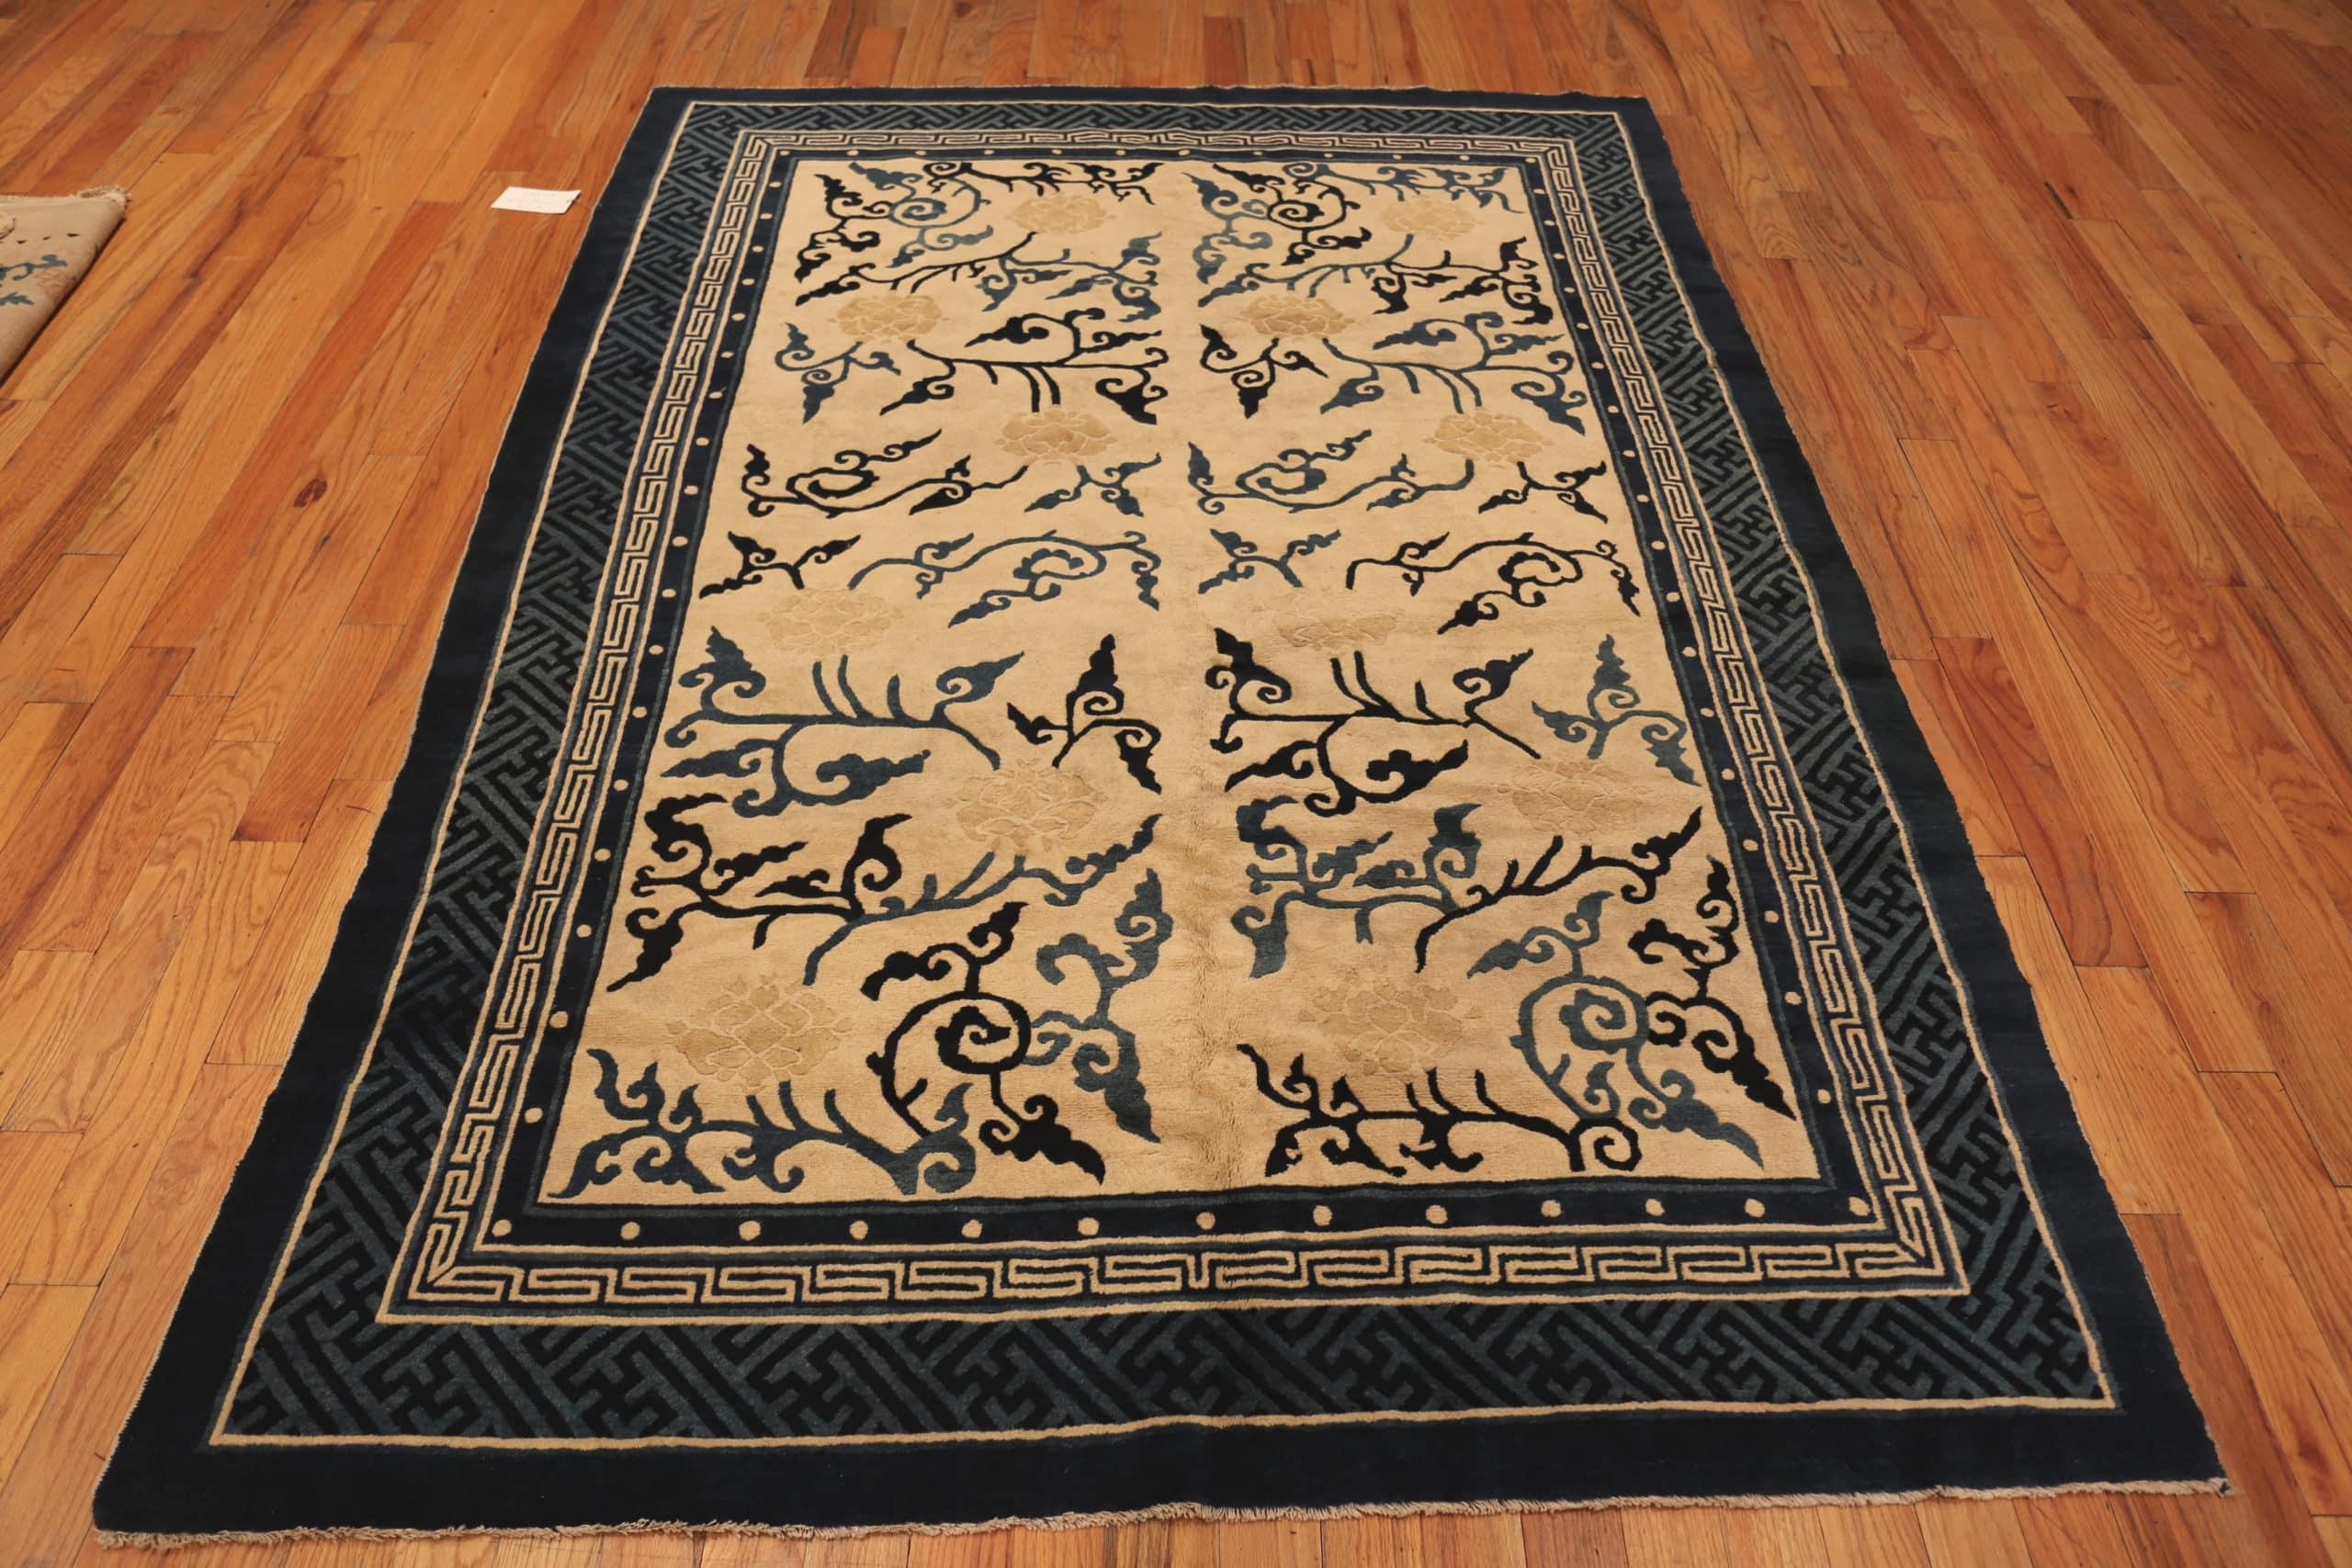 Antique Chinese Peking Cream And Blue Rug, Country of Origin / rug type: China, Circa date: 1900. Size: 6 ft x 8 ft 2 in (1.83 m x 2.49 m)
 